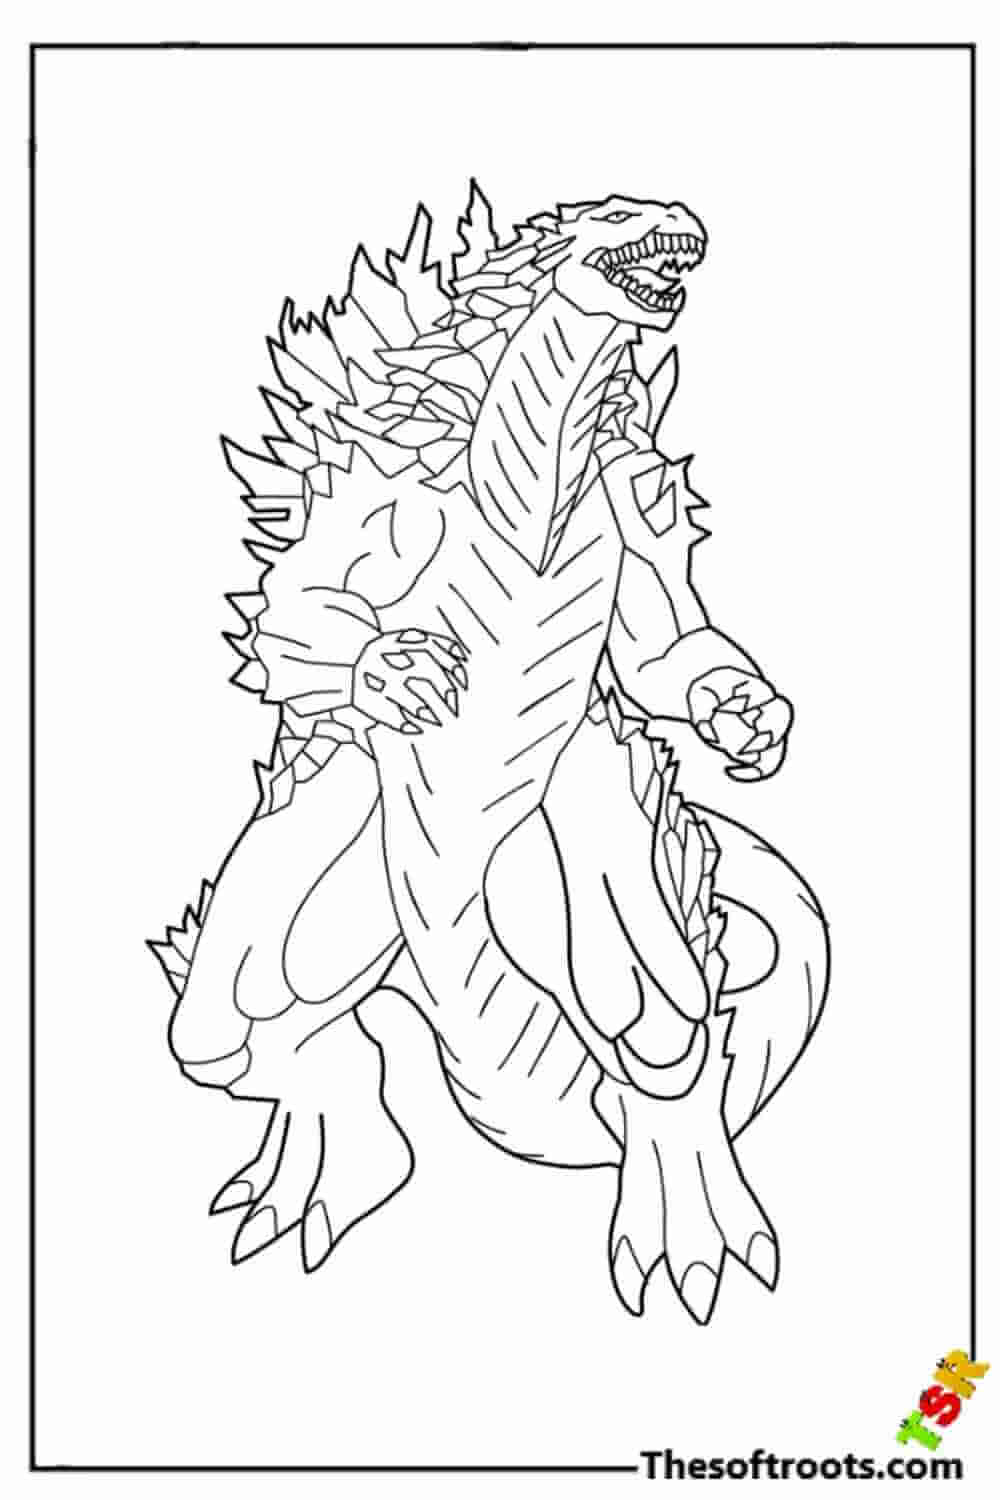 Primuszilla coloring pages